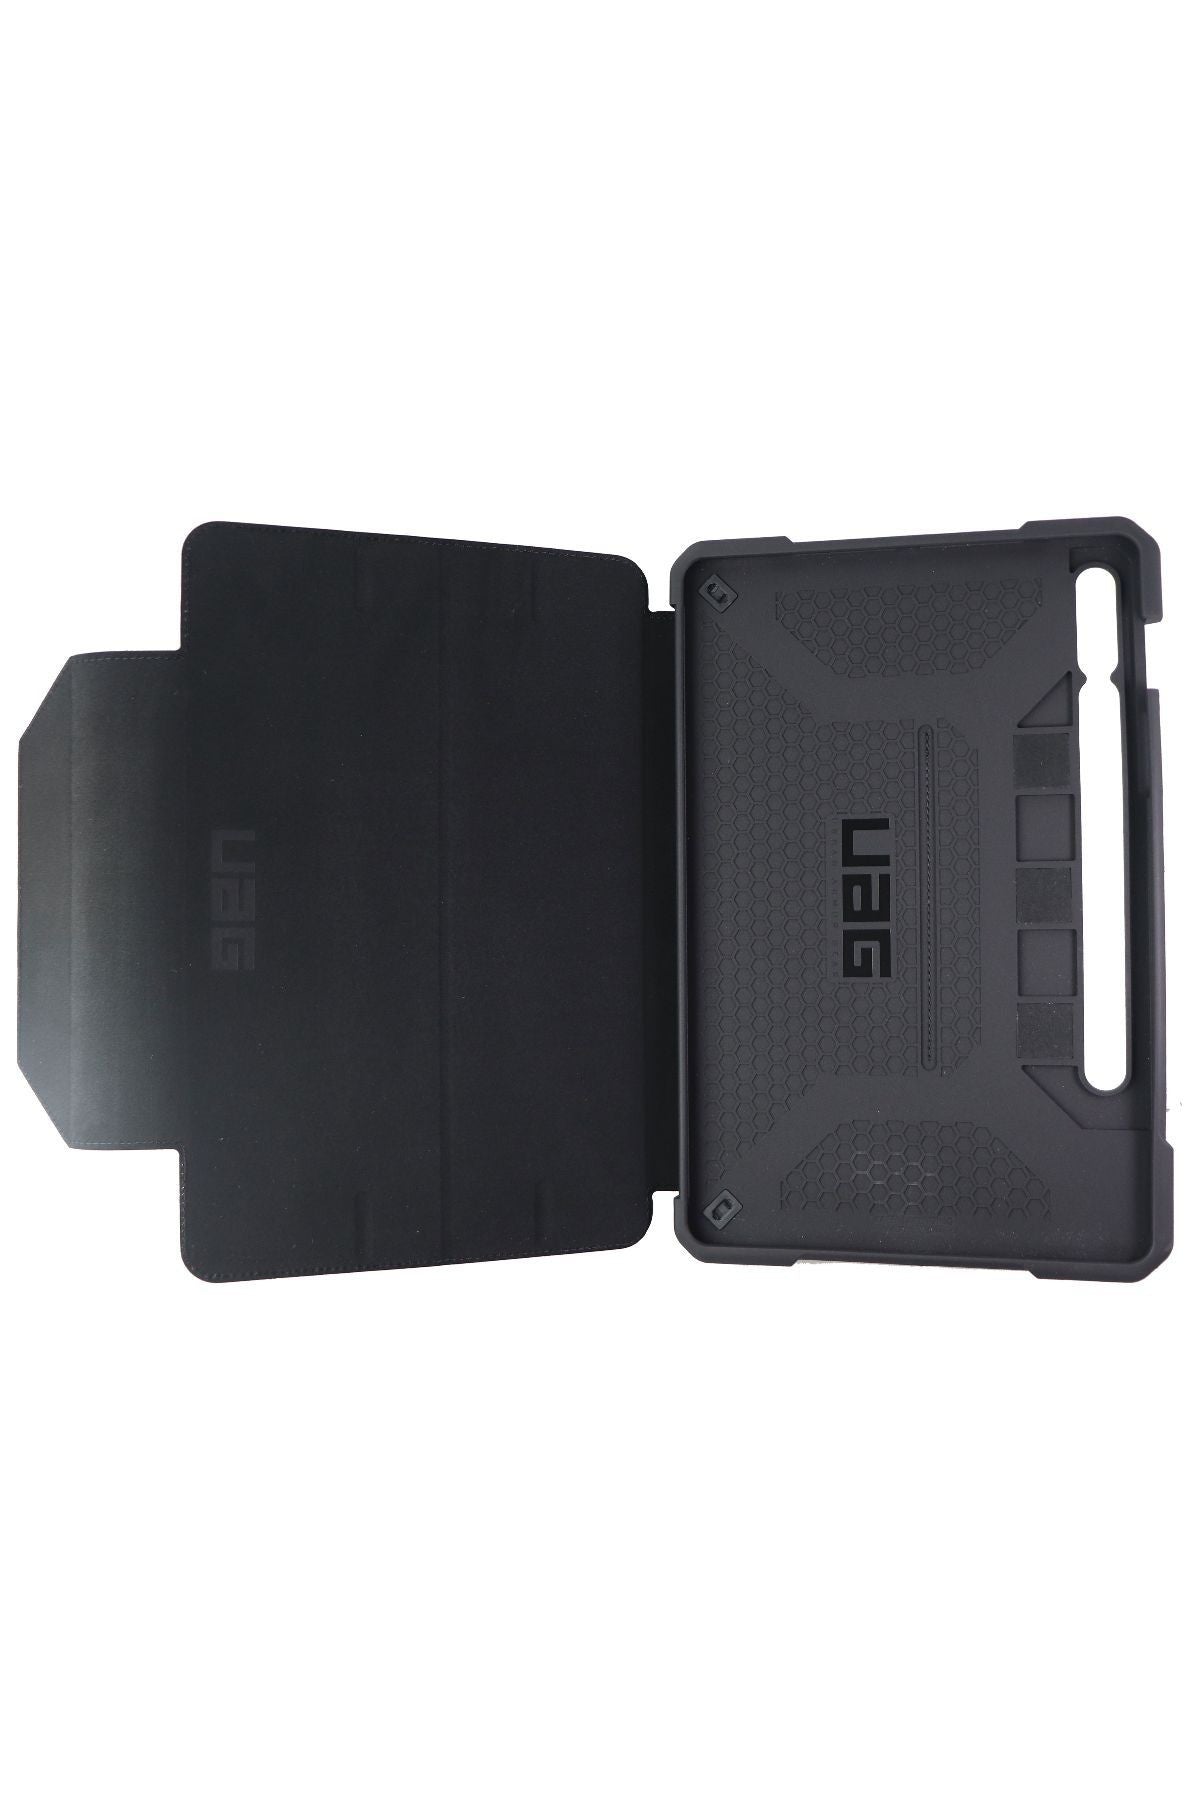 Urban Armor Gear Metropolis Case for Samsung Galaxy Tab S7 / S7 5G - Black iPad/Tablet Accessories - Cases, Covers, Keyboard Folios Urban Armor Gear    - Simple Cell Bulk Wholesale Pricing - USA Seller